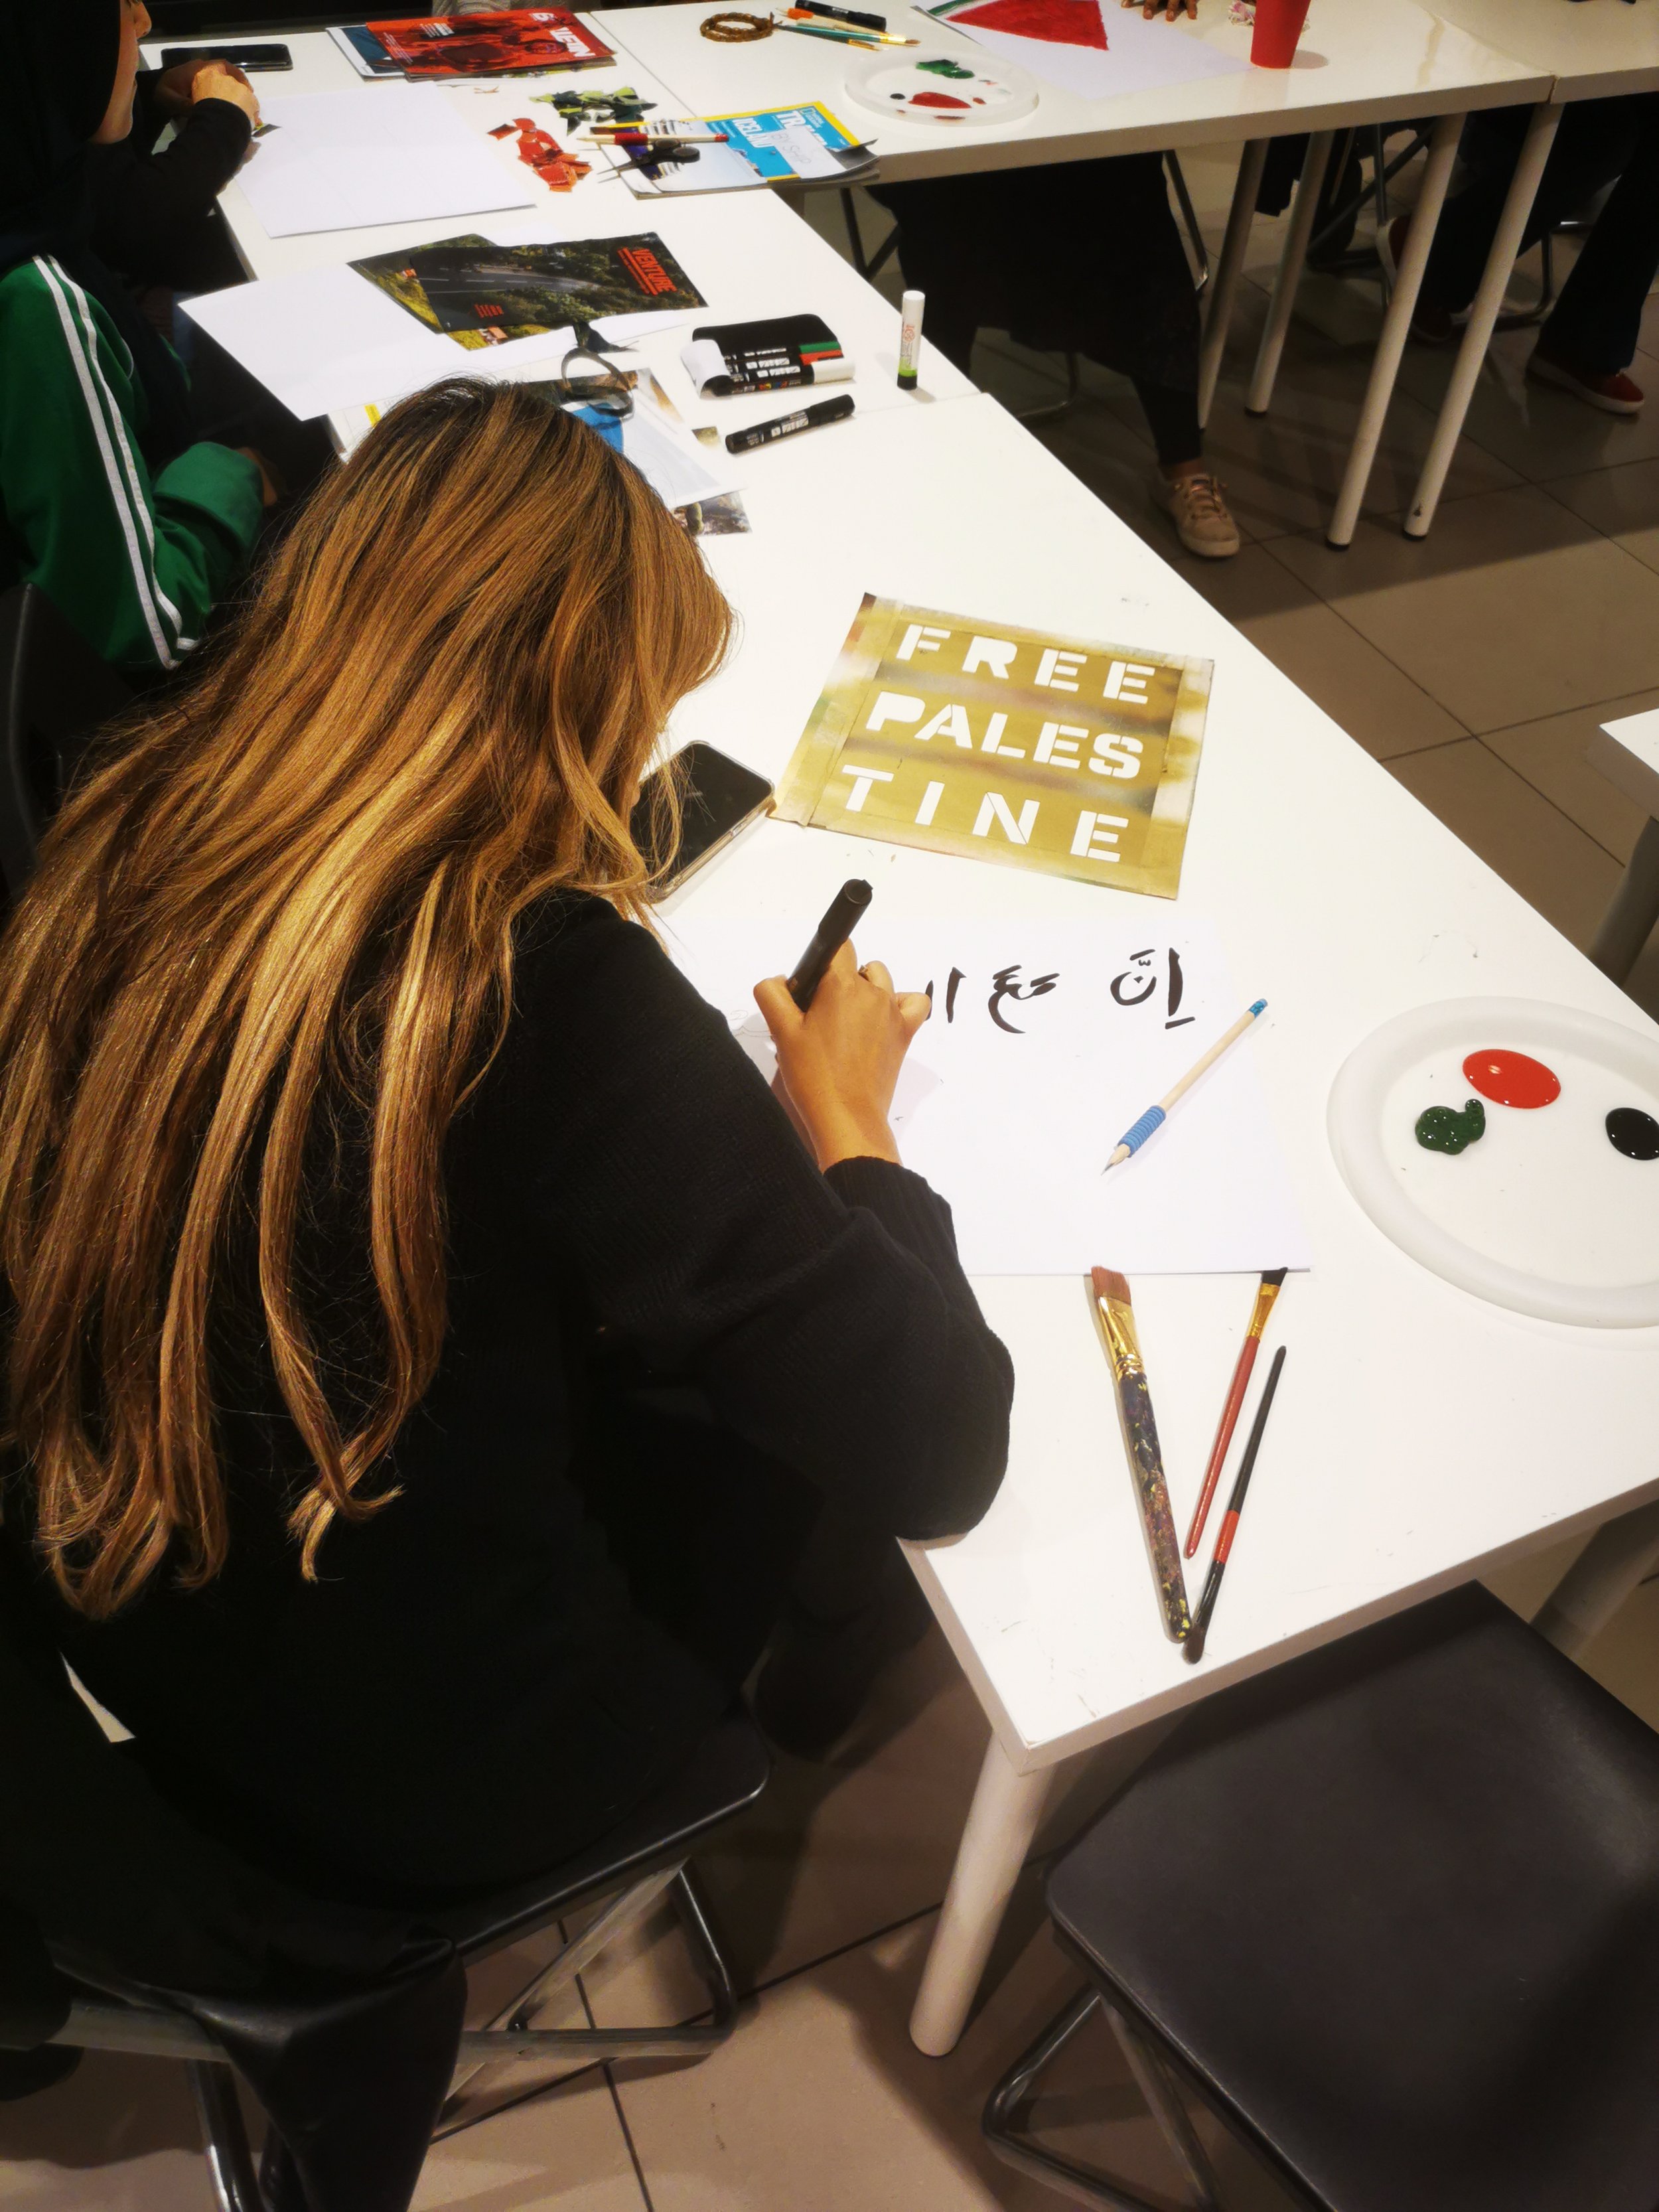  Poster making workshop in support for the freedom of Palestine at the Migration Museum. The workshop was open to all ages and mediums used included drawing, painting and collaging. 